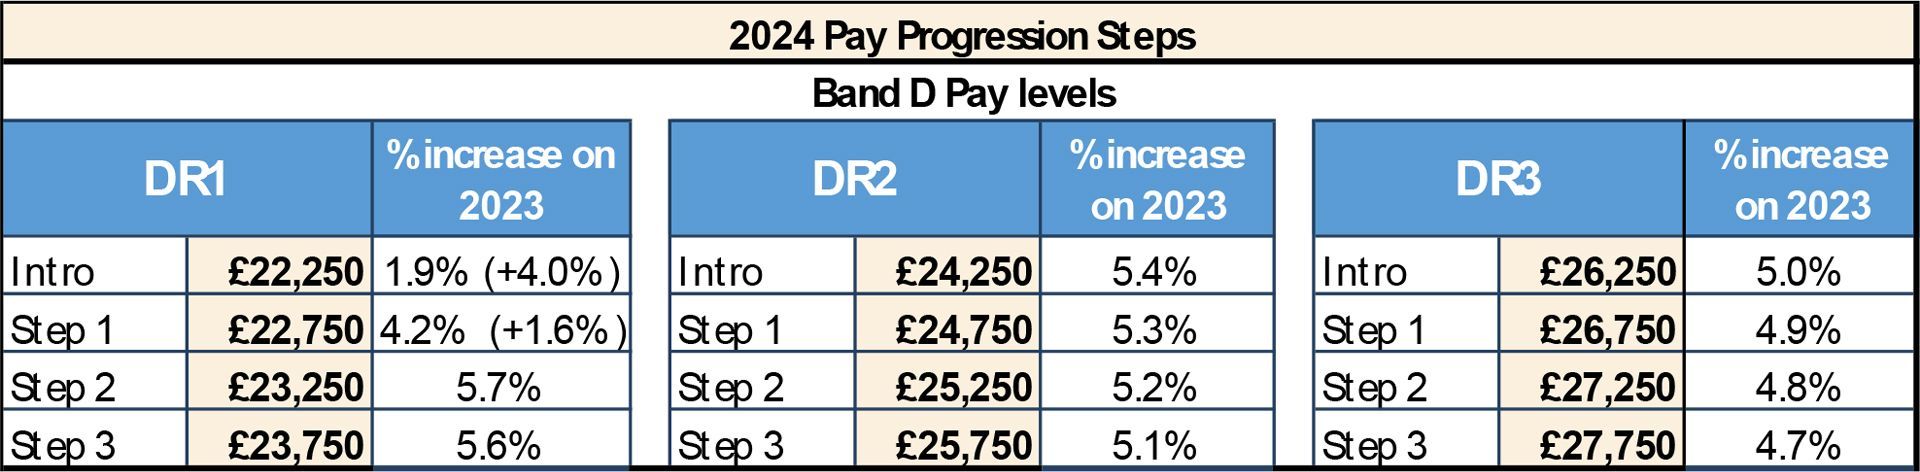 2024 Pay Progression Steps Table 1920w 